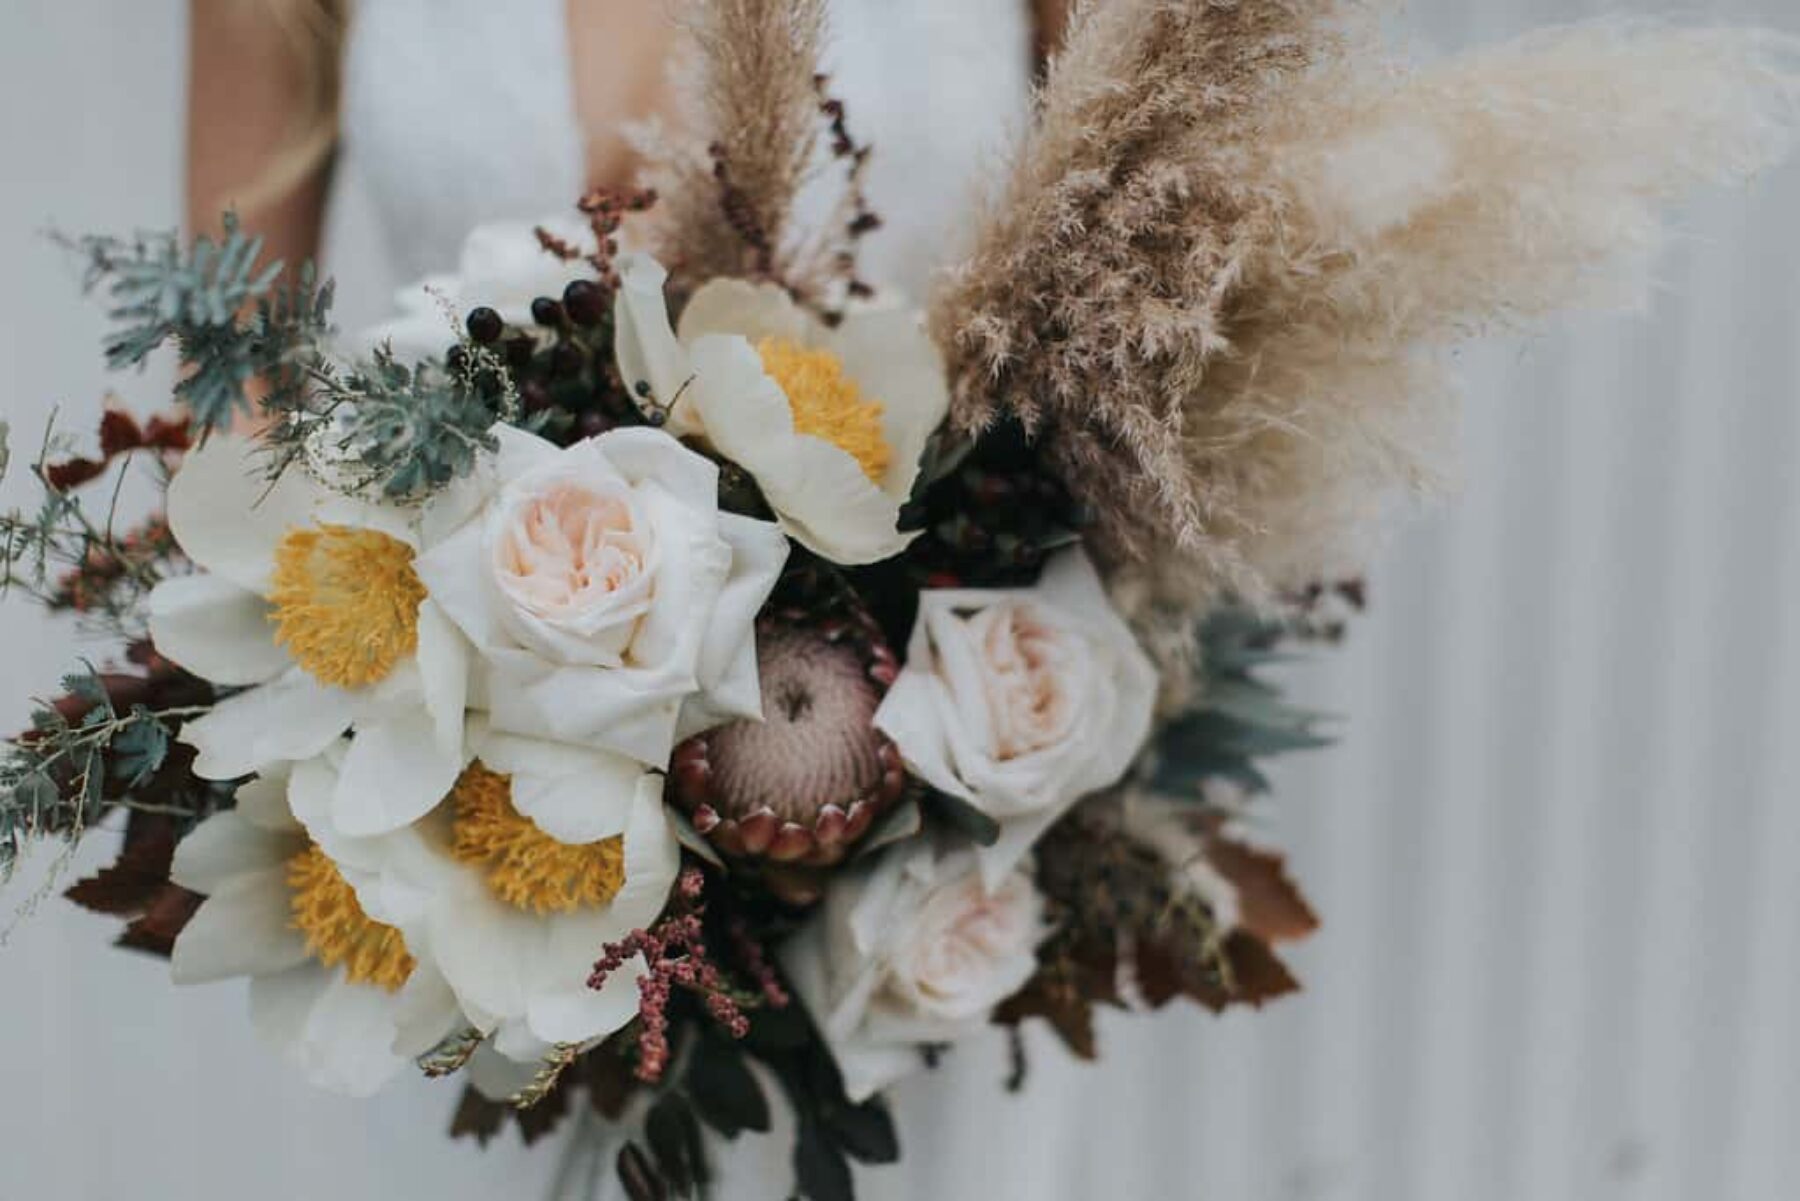 unstructured oversized bridal bouquet with magnolias and plumes of pampas grass